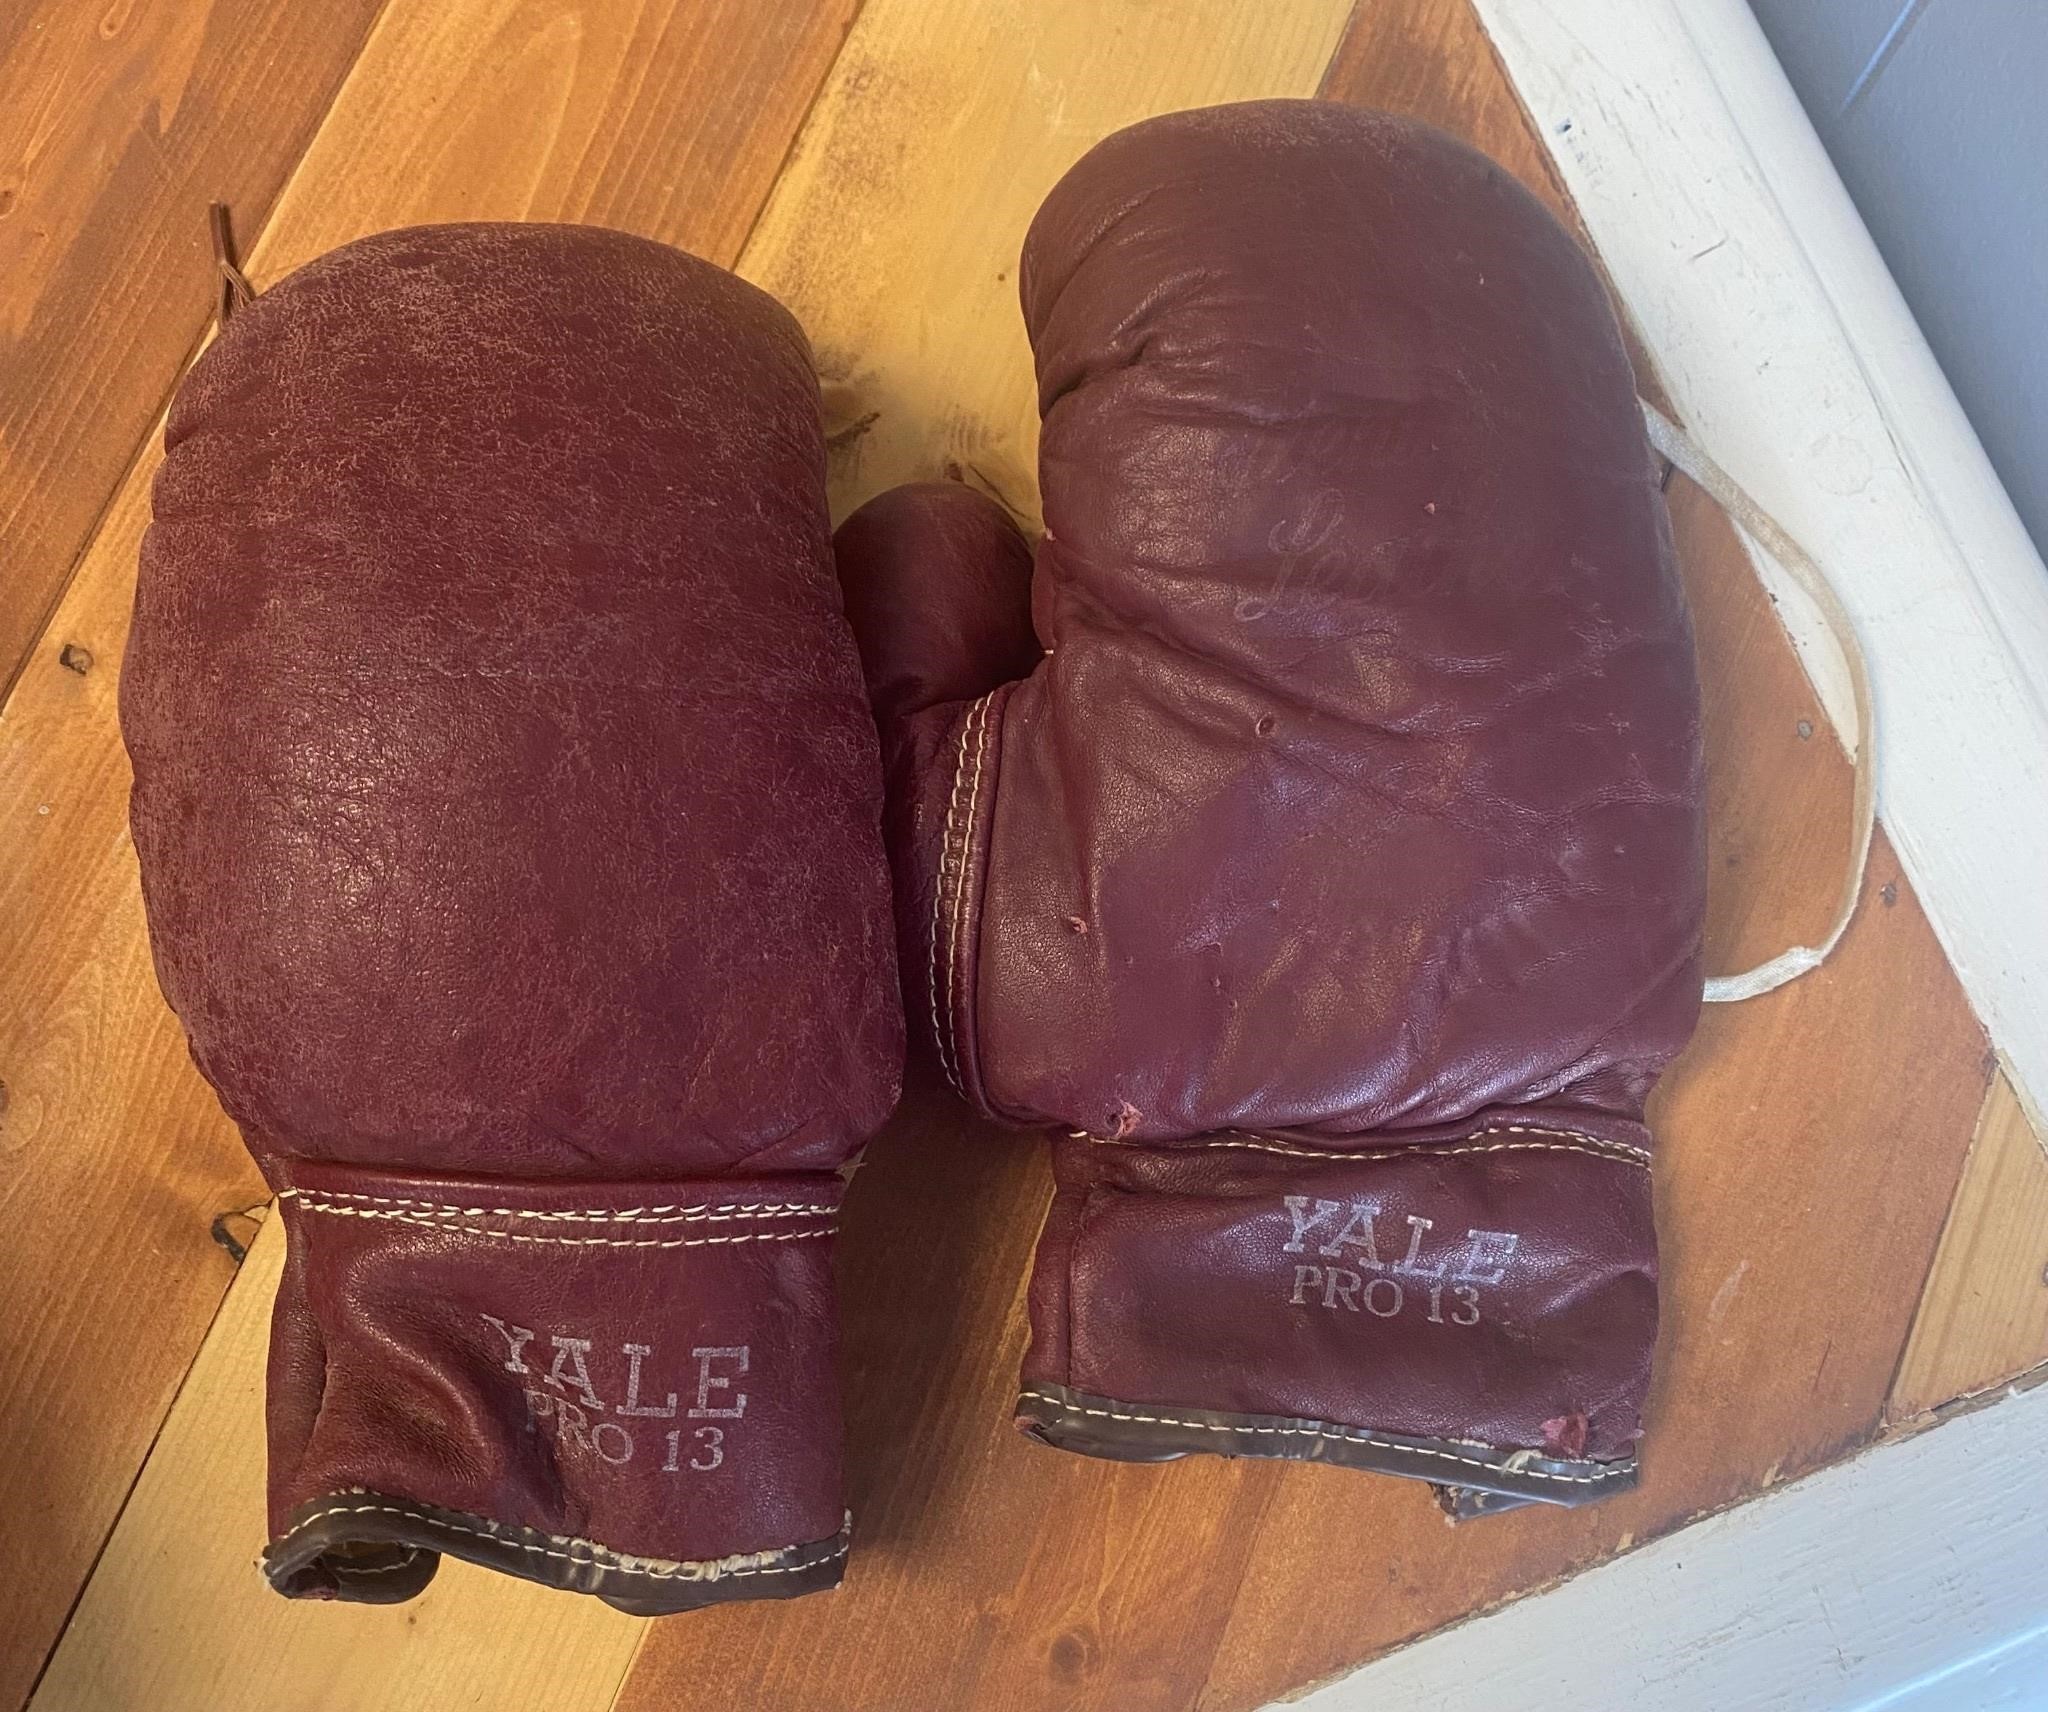 1940s Yale Pro 13 Leather Boxing Gloves